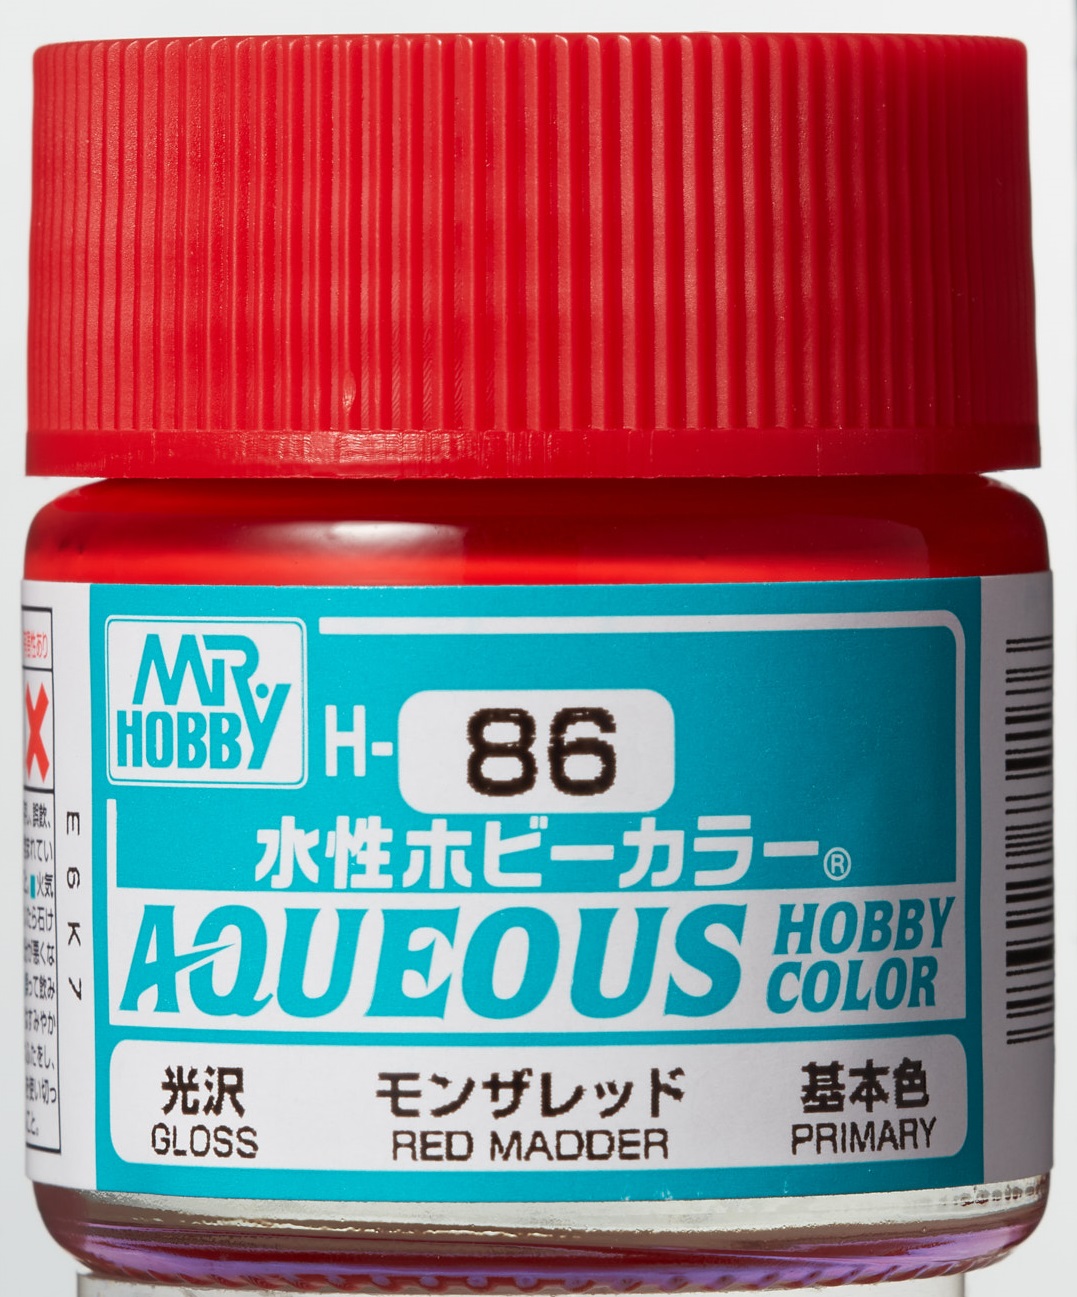 Mr. Aqueous Hobby Color - Red Madder - H86 - Krapp Rot